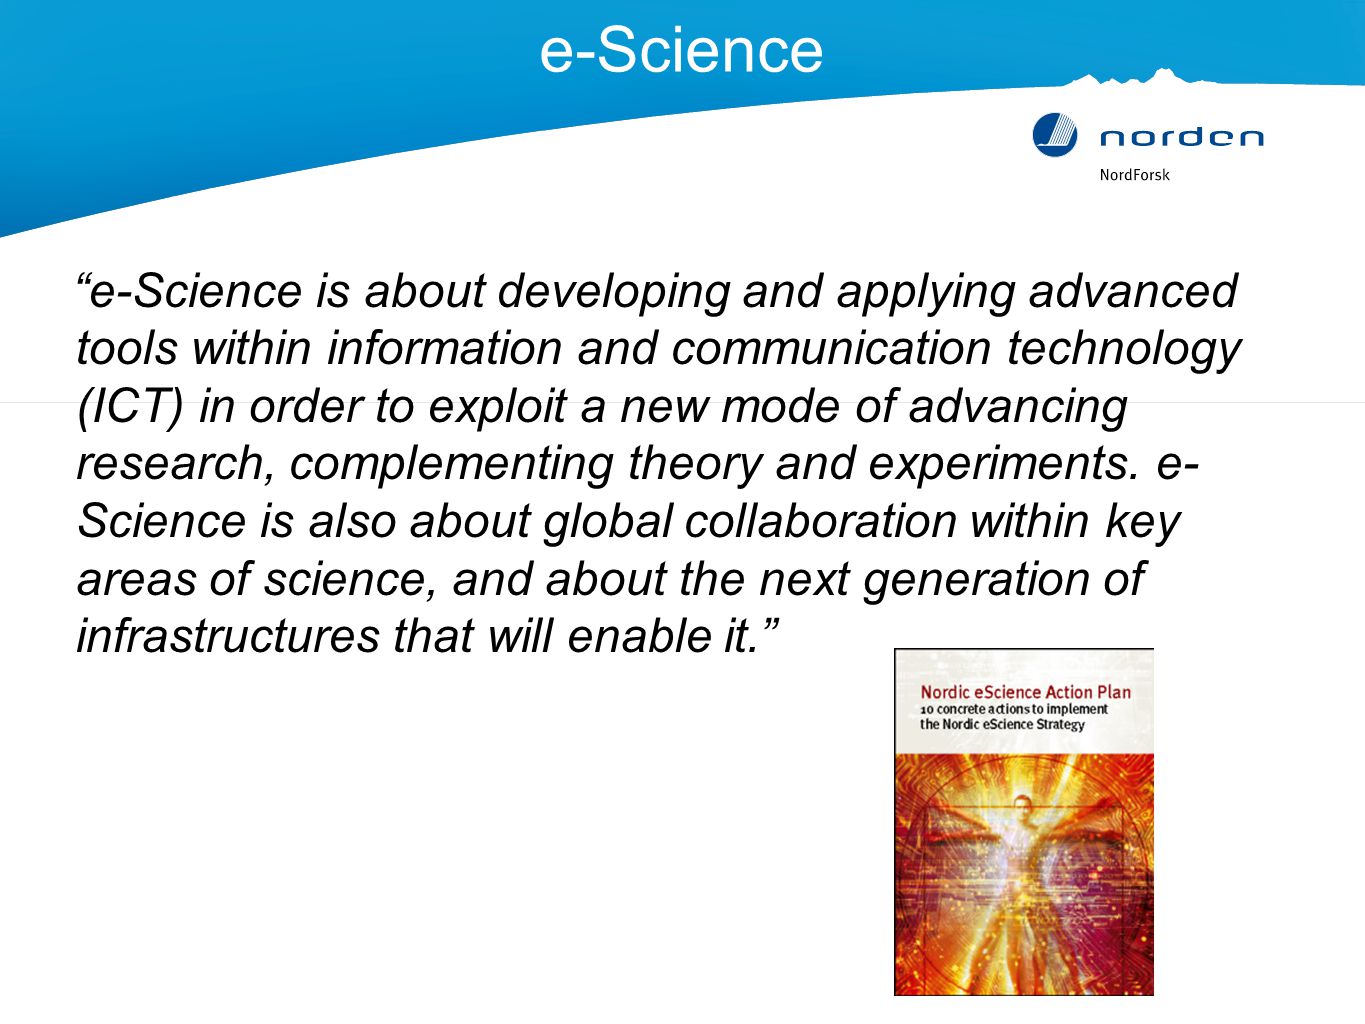 e-Science e-Science is about developing and applying advanced tools within information and communication technology (ICT) in order to exploit a new mode of advancing research, complementing theory and experiments.